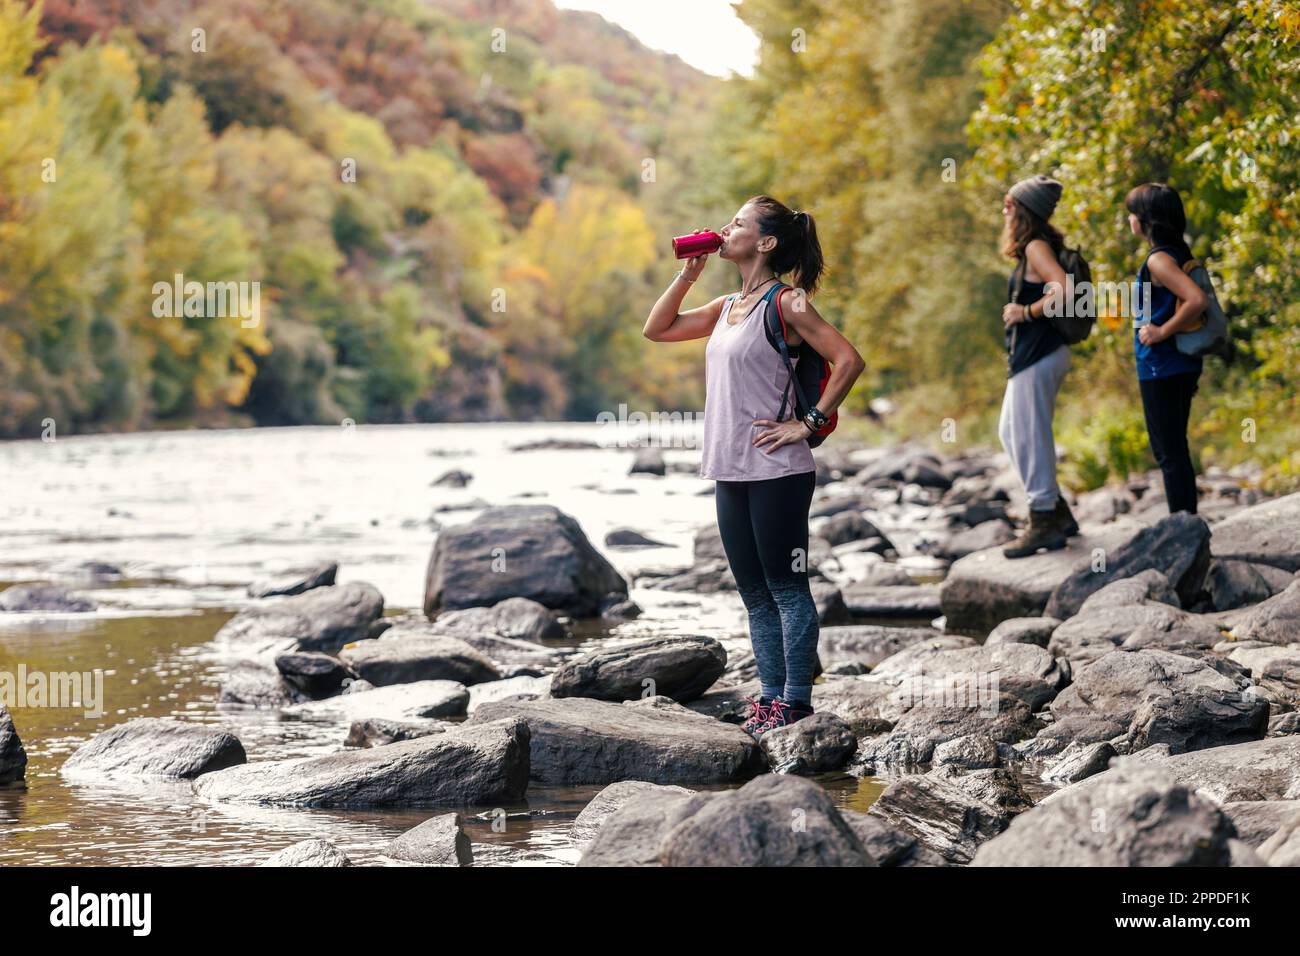 Woman drinking water from bottle with daughters standing in background Stock Photo